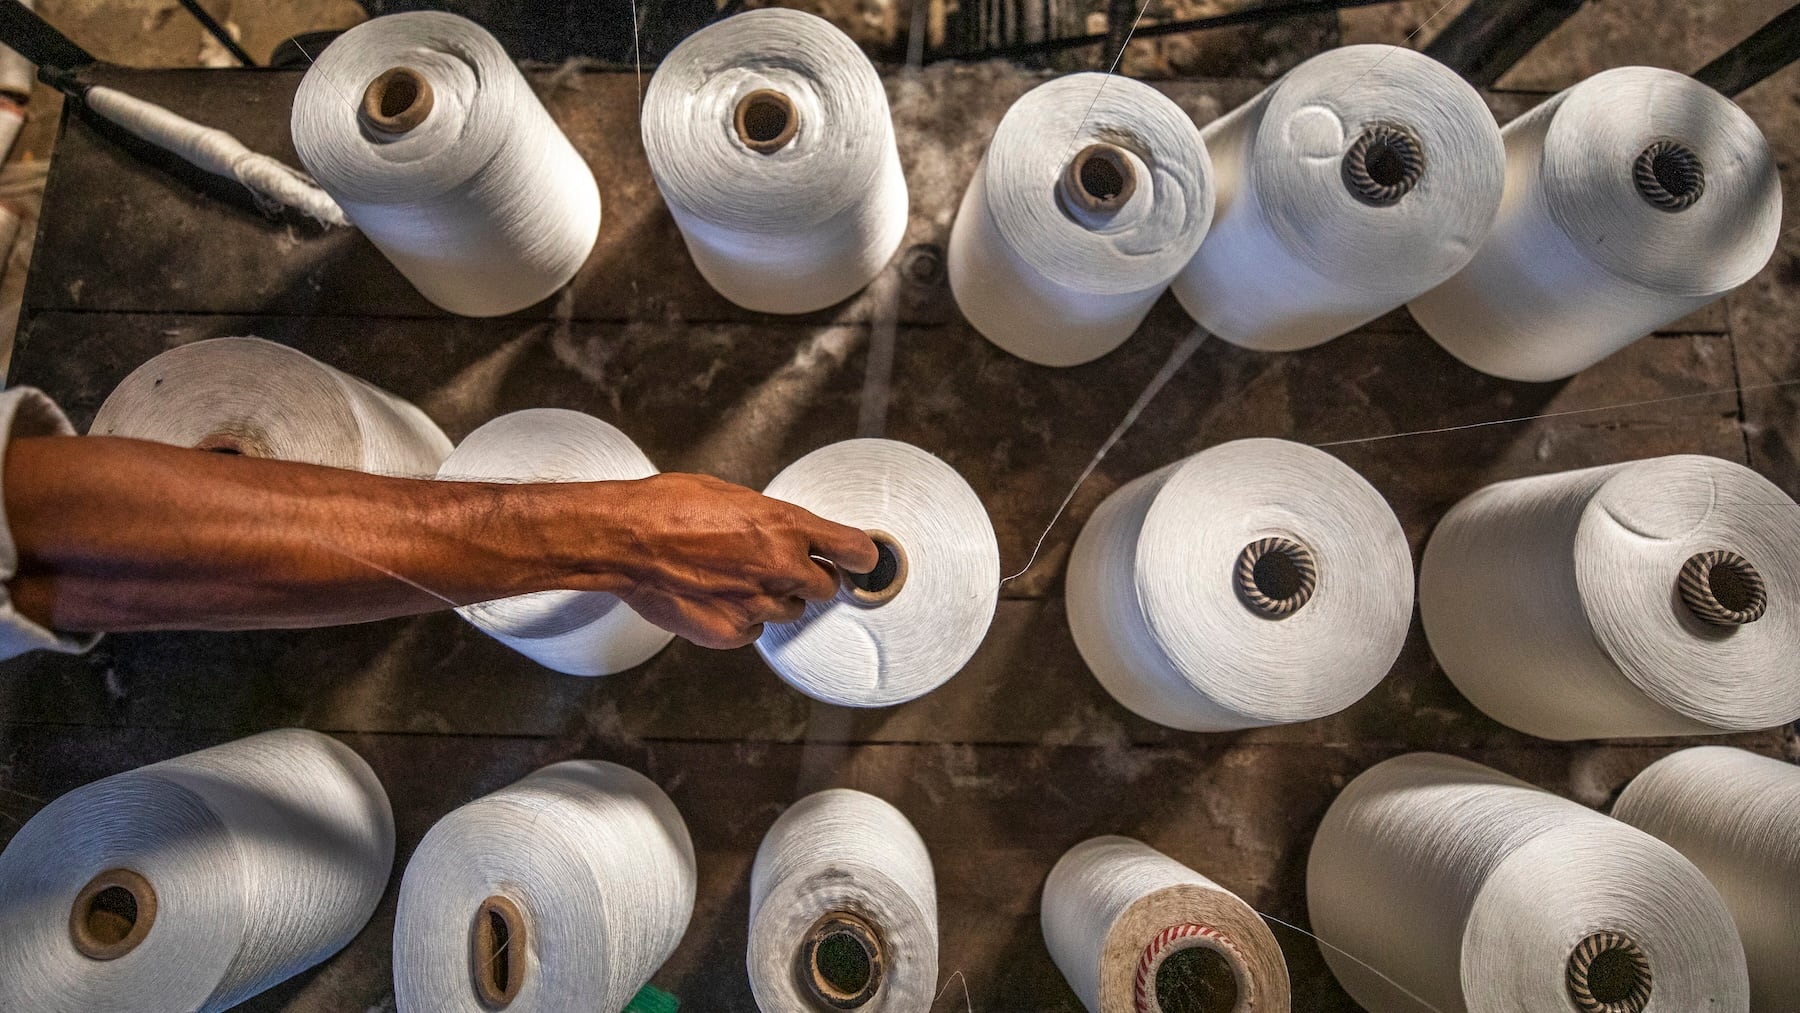 Who Will Finance a More Sustainable Fashion Industry?